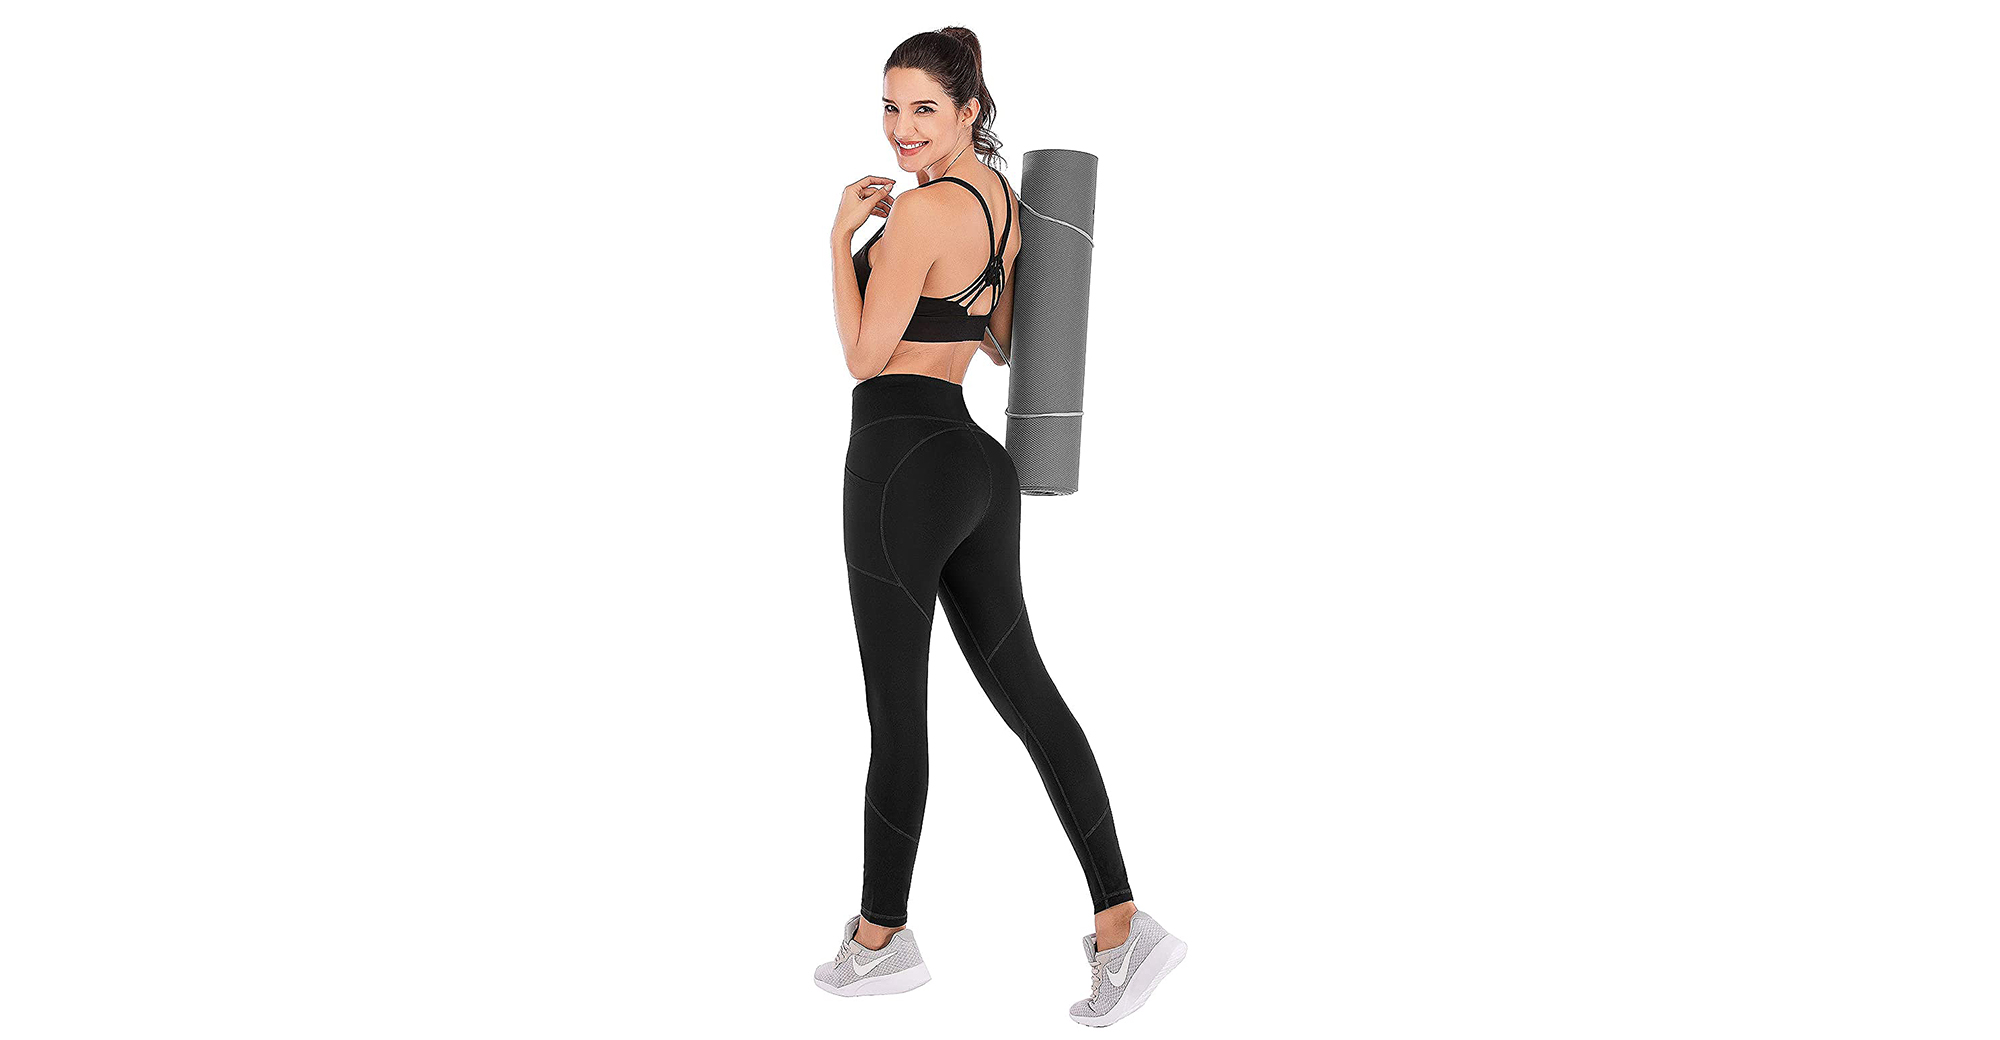 17 Cyber Monday Workout Gear Sales to Shop Now - PureWow